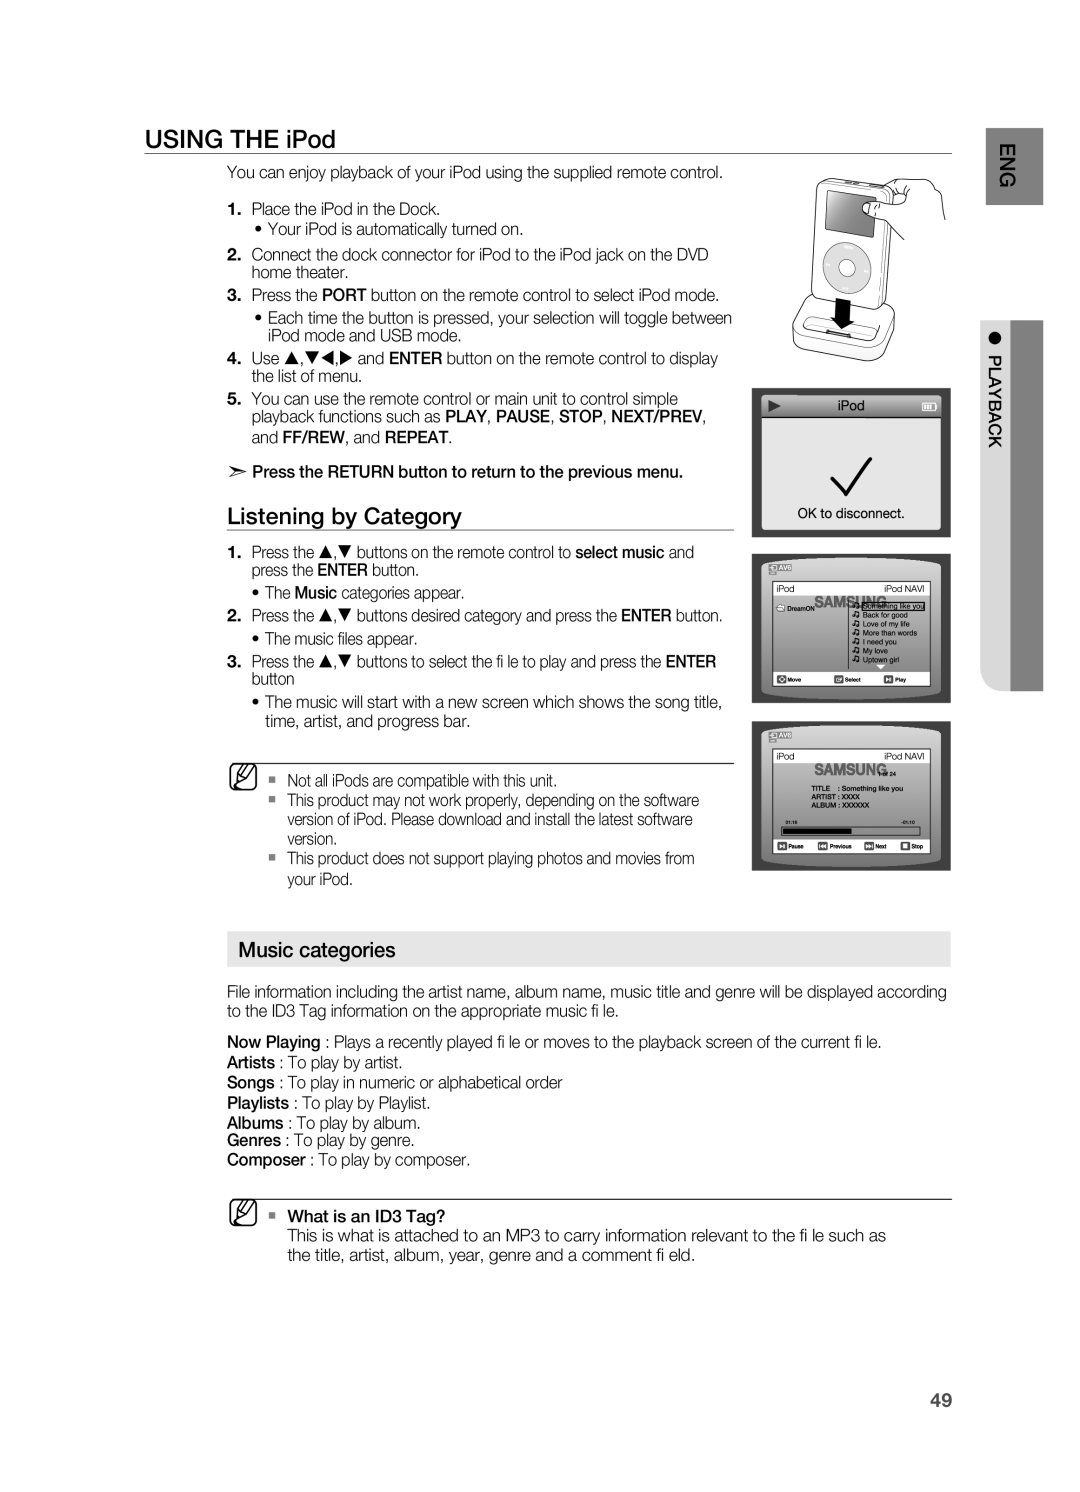 Samsung HT-Z510 manual USINg THE iPod, Listening by Category, Music categories 